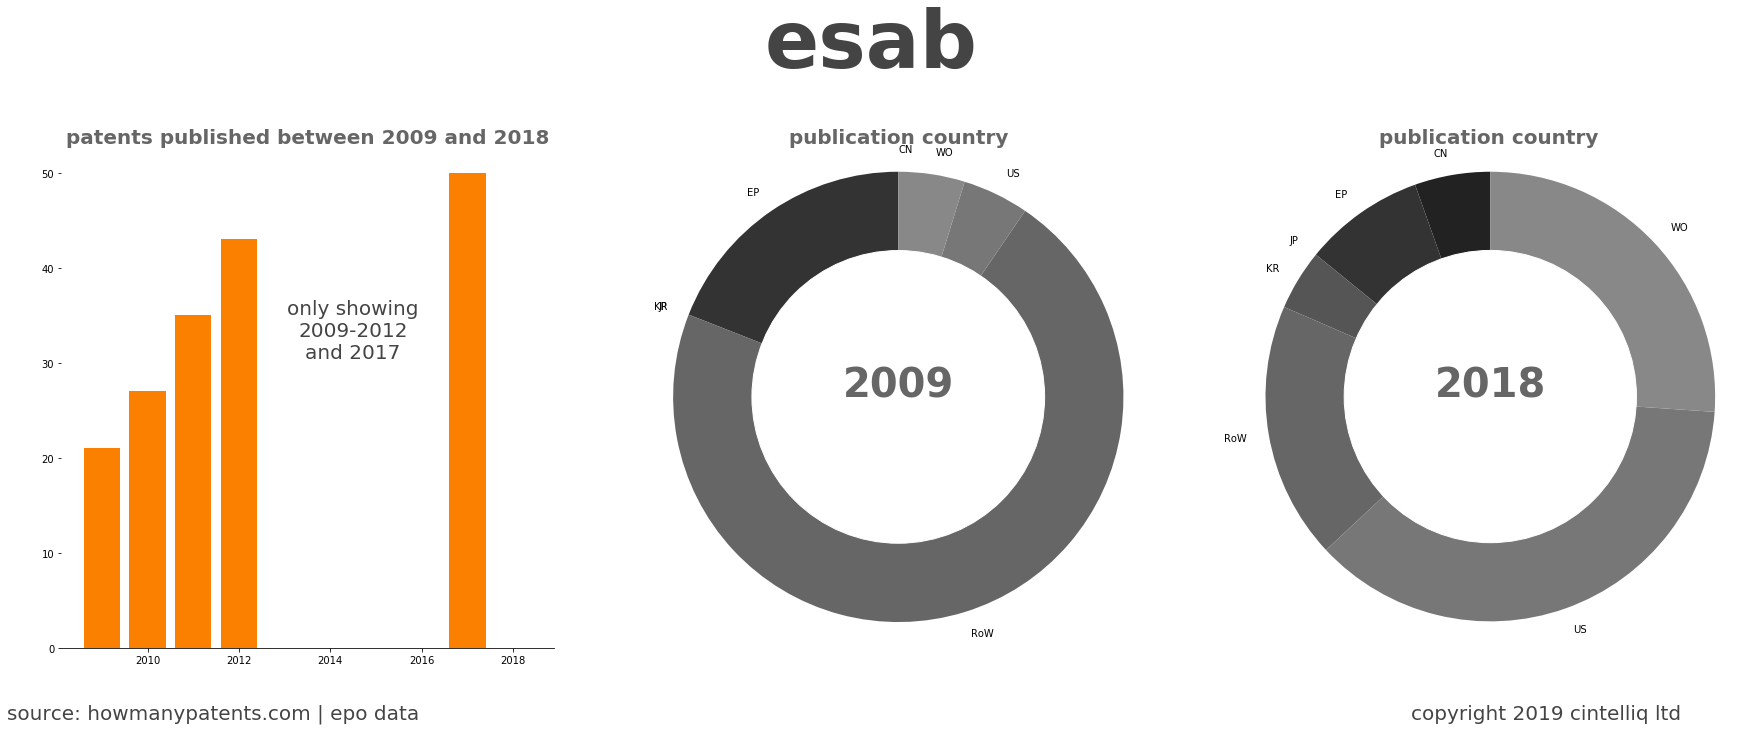 summary of patents for Esab